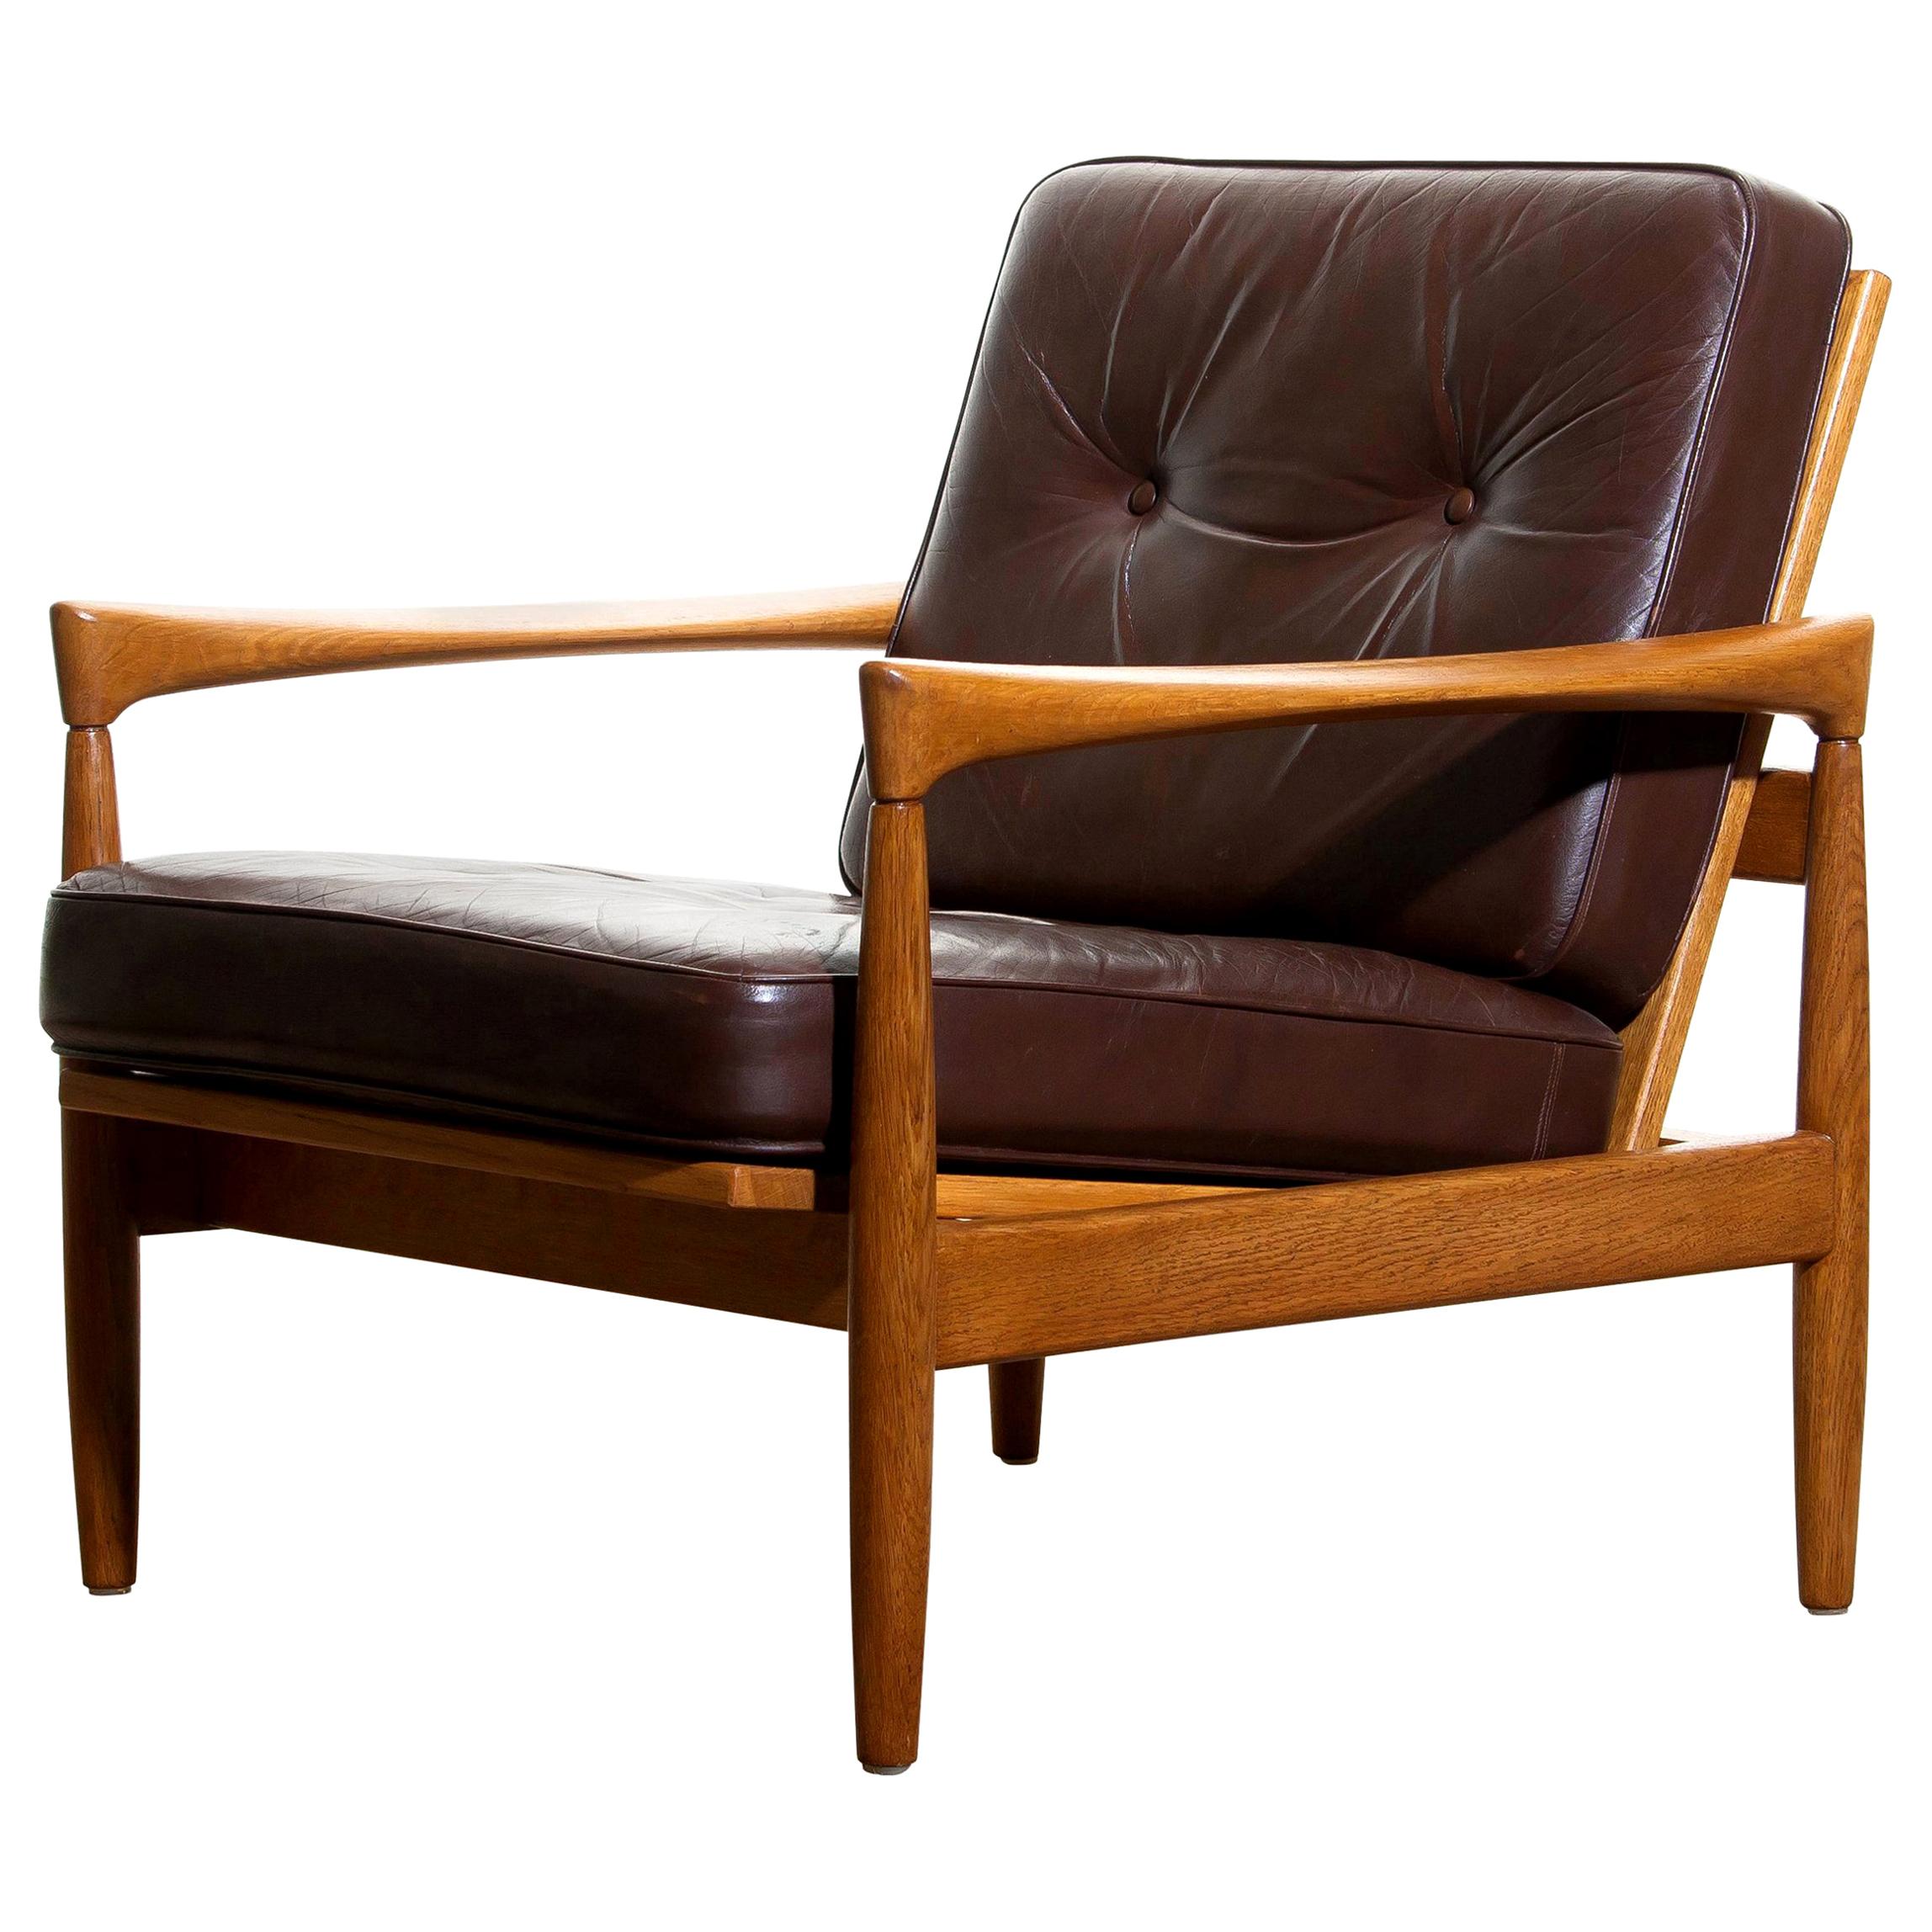 1960s, Oak With Brown Leather Lounge Chair by Erik Wörtz for Bröderna Anderssons